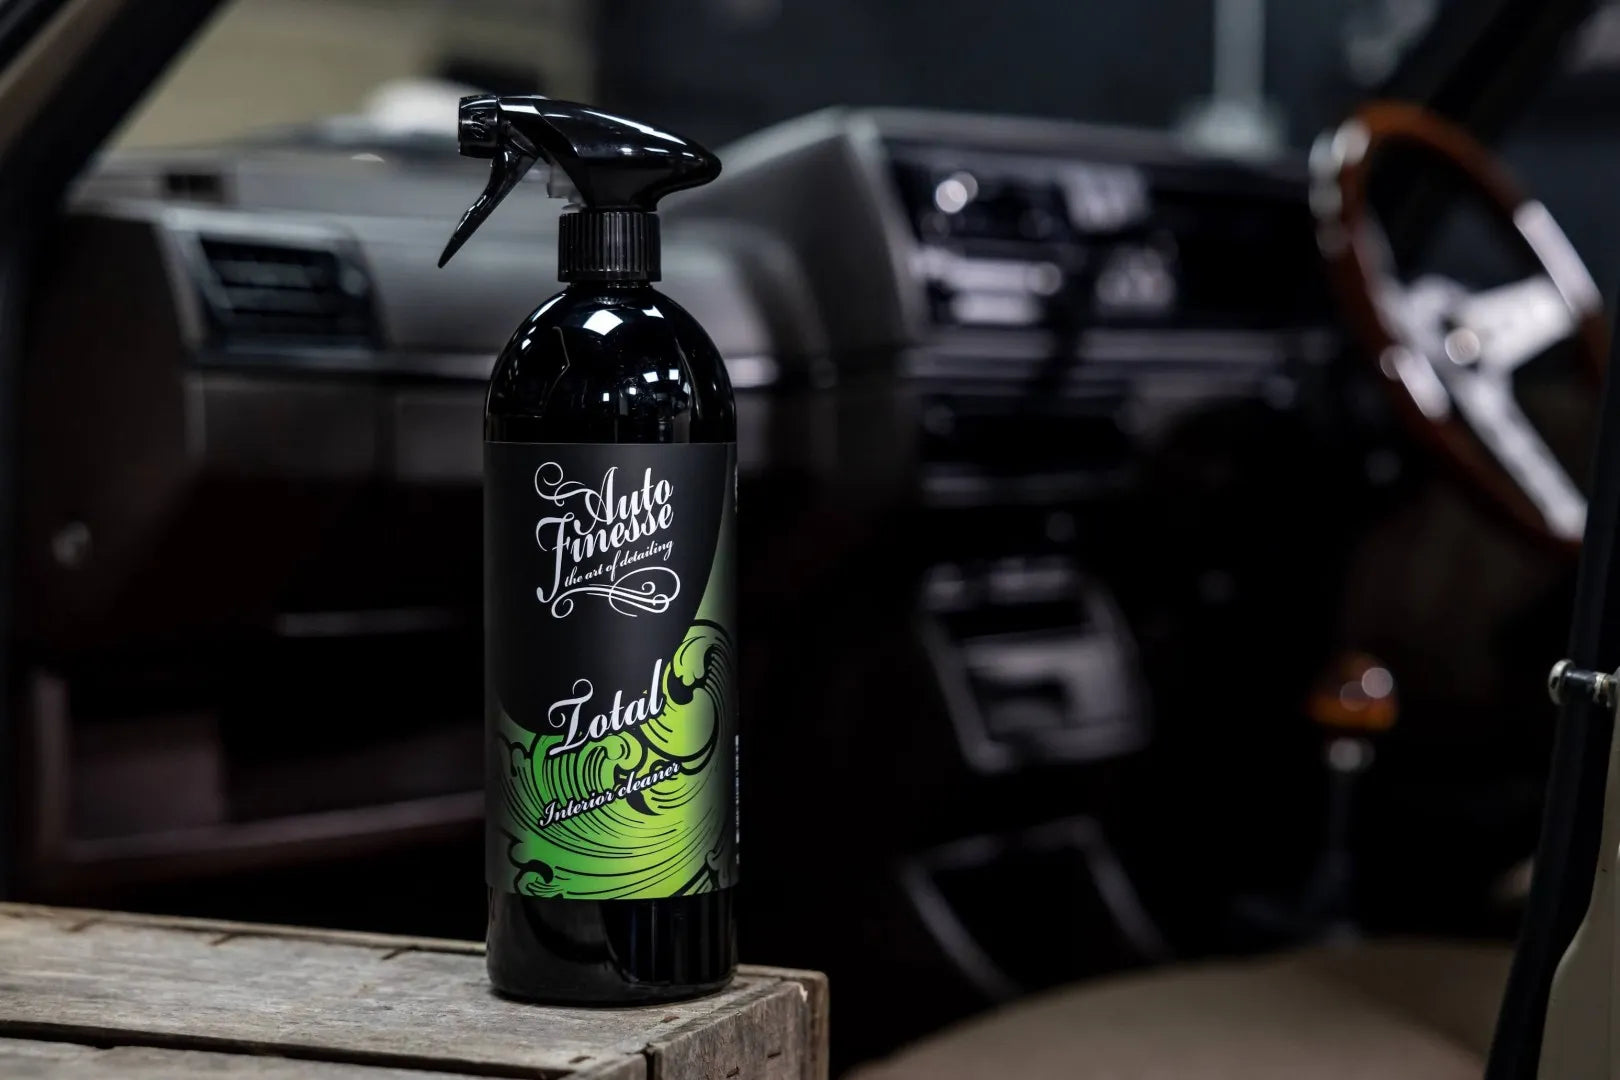 Auto Finesse - Total Interior Cleaner